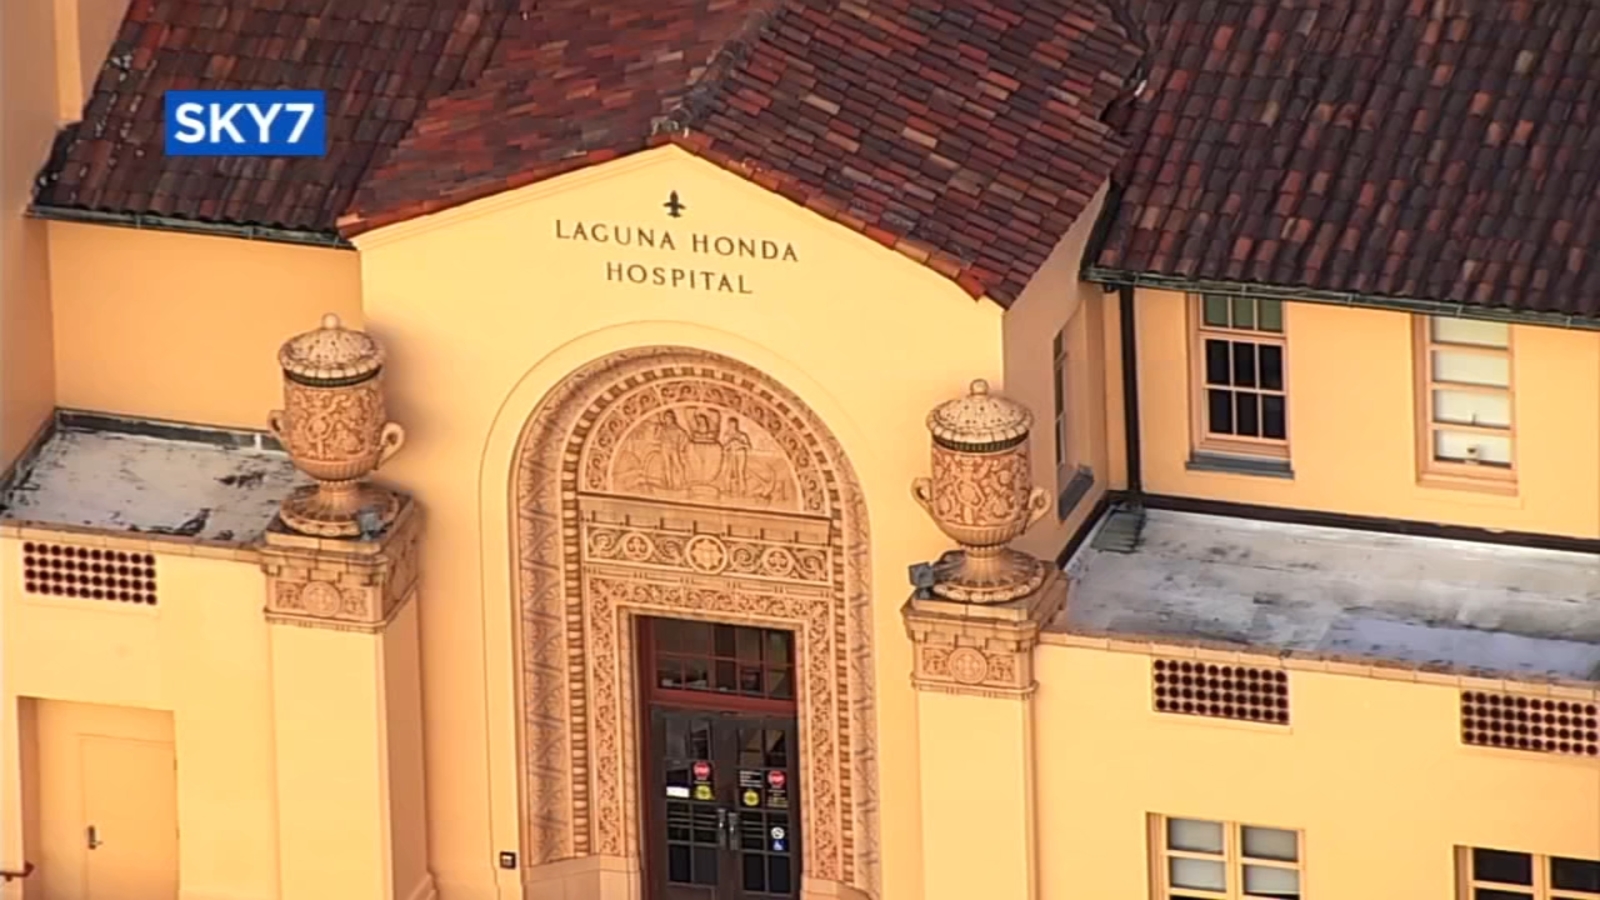 San Francisco’s Laguna Honda Hospital federal funding now fully restored after readmitted into Medicare program [Video]